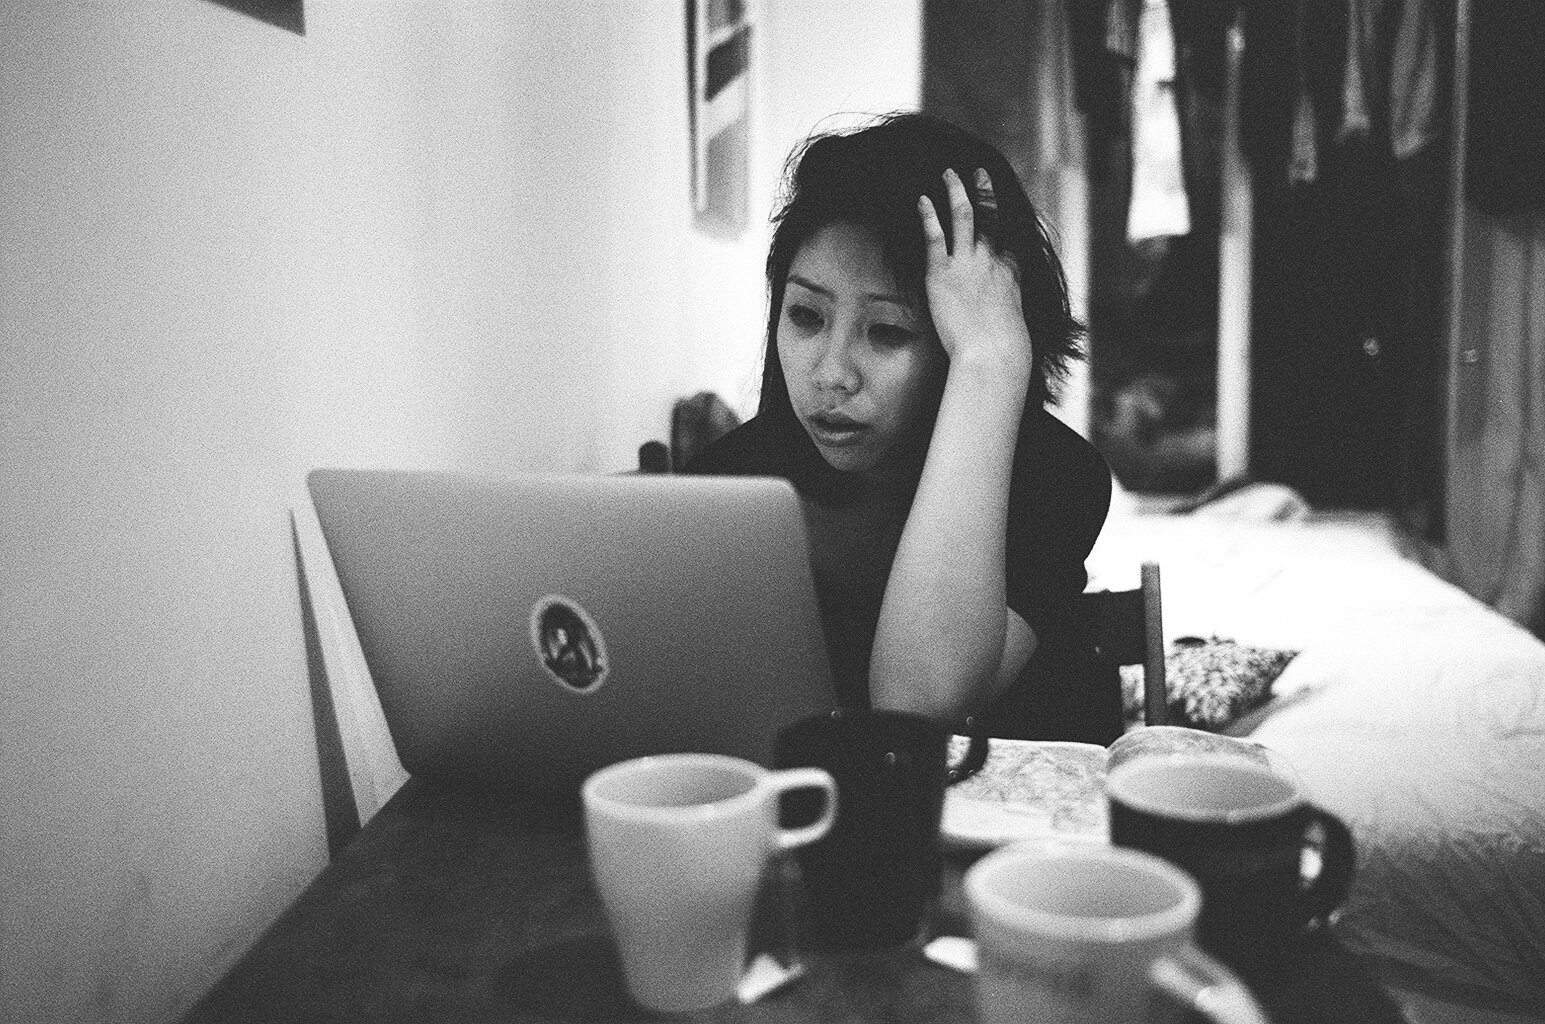 eric-kim-photography-Cindy-Project-black-and-white-4-paris-coffee-hand-stress-laptop.jpg